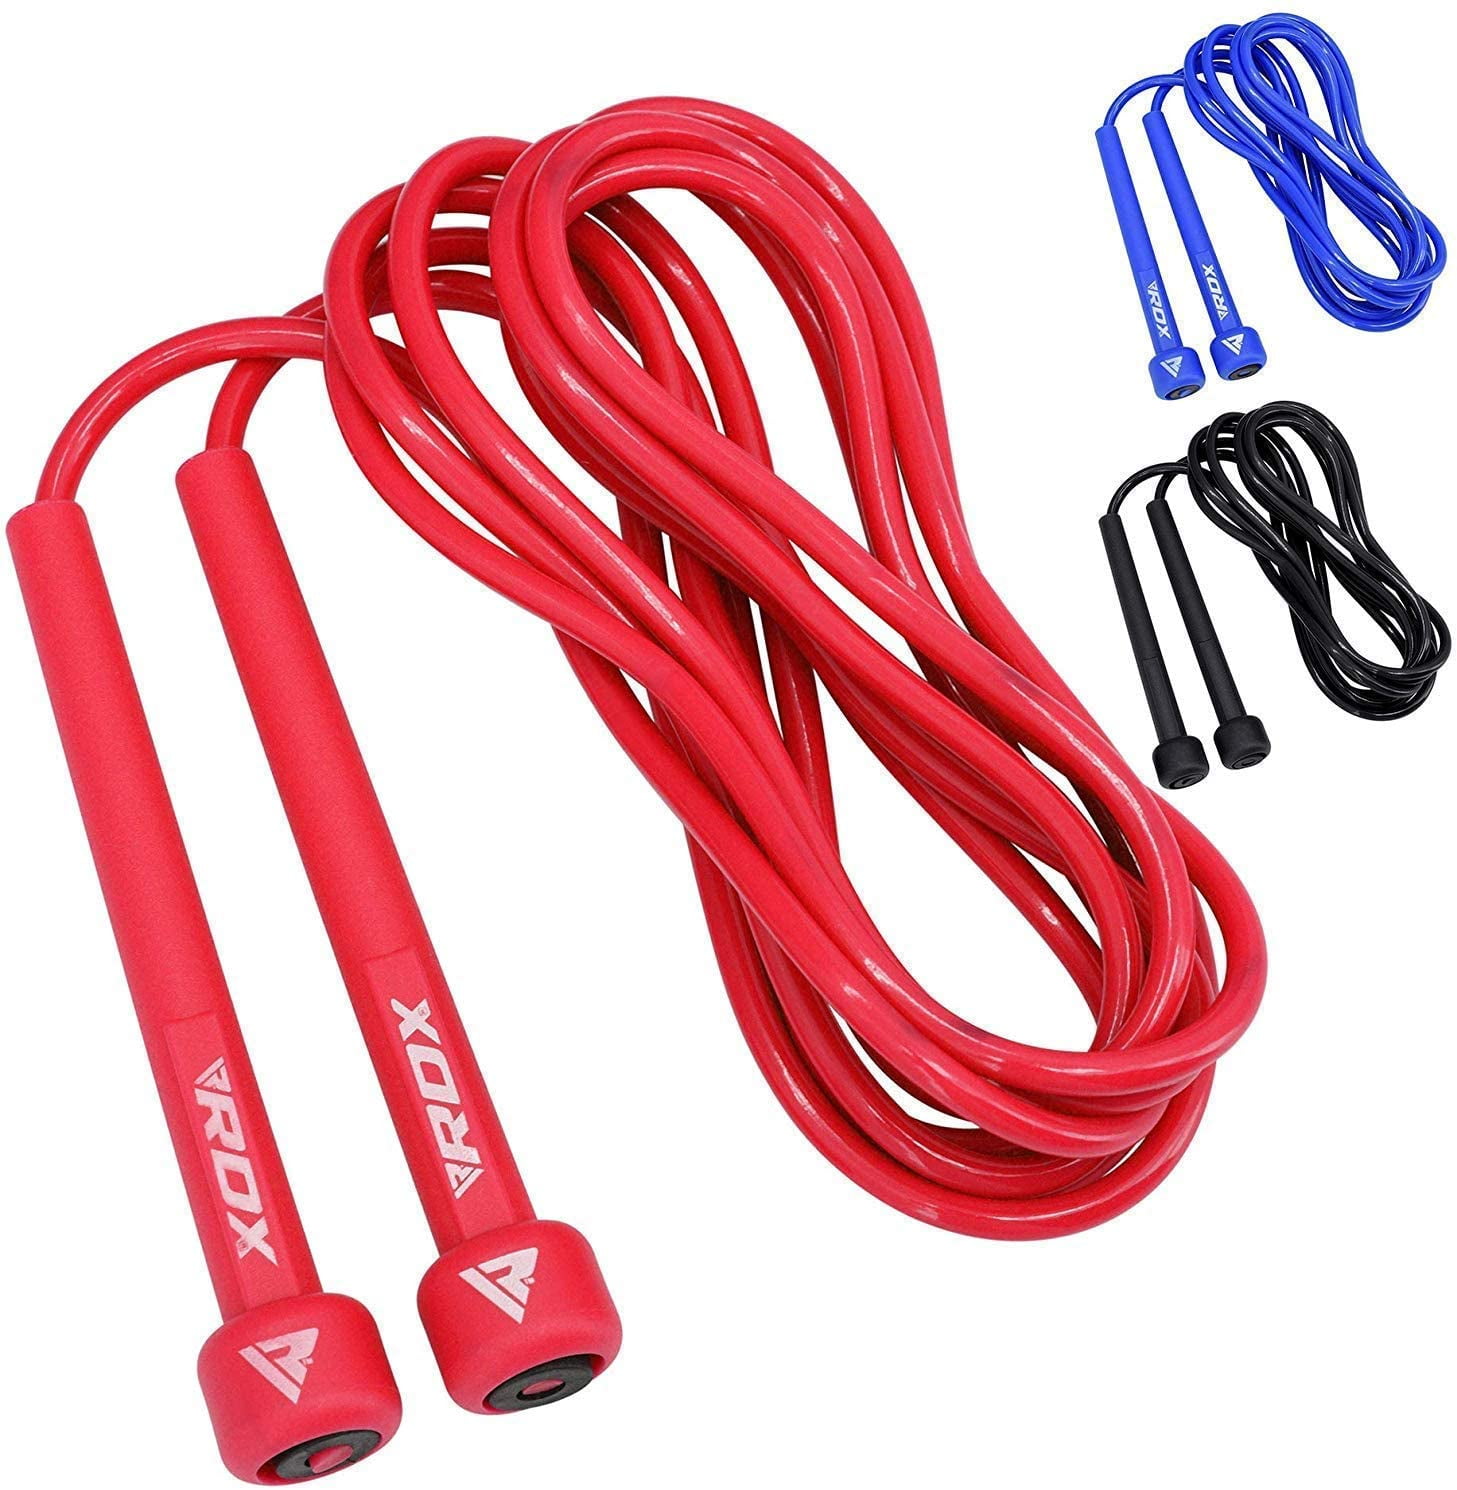 RDX Jump Rope- Adjustable PVC Speed Rope For Weight Training, Cable ...